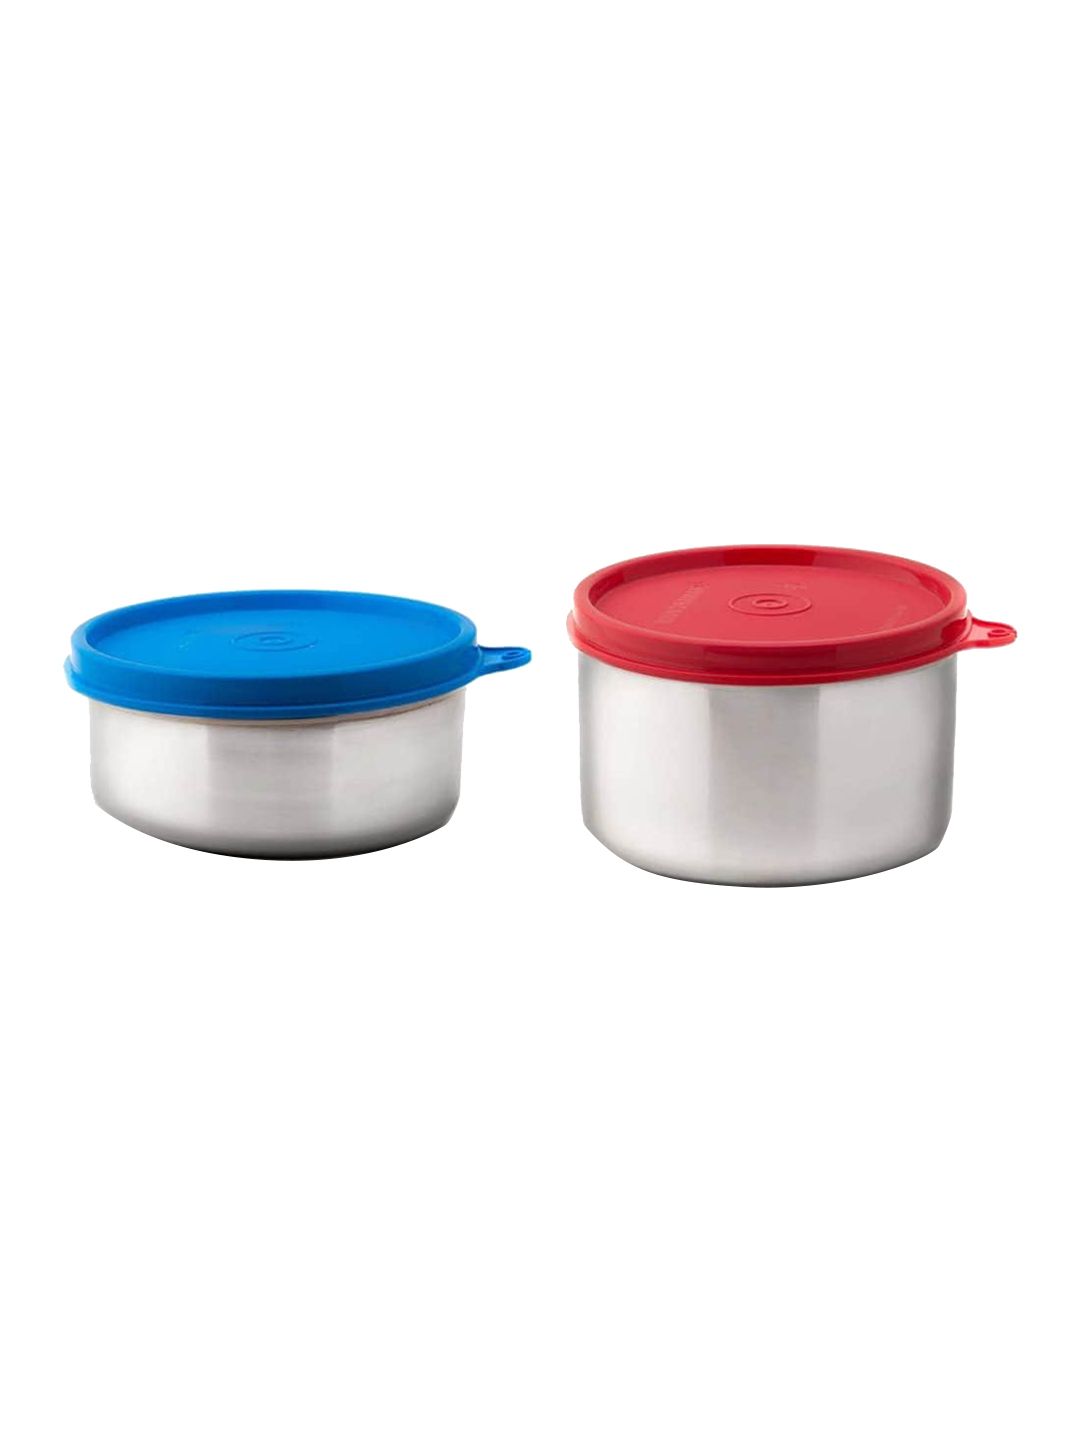 SignoraWare Set of 2 Steel Food Container Price in India